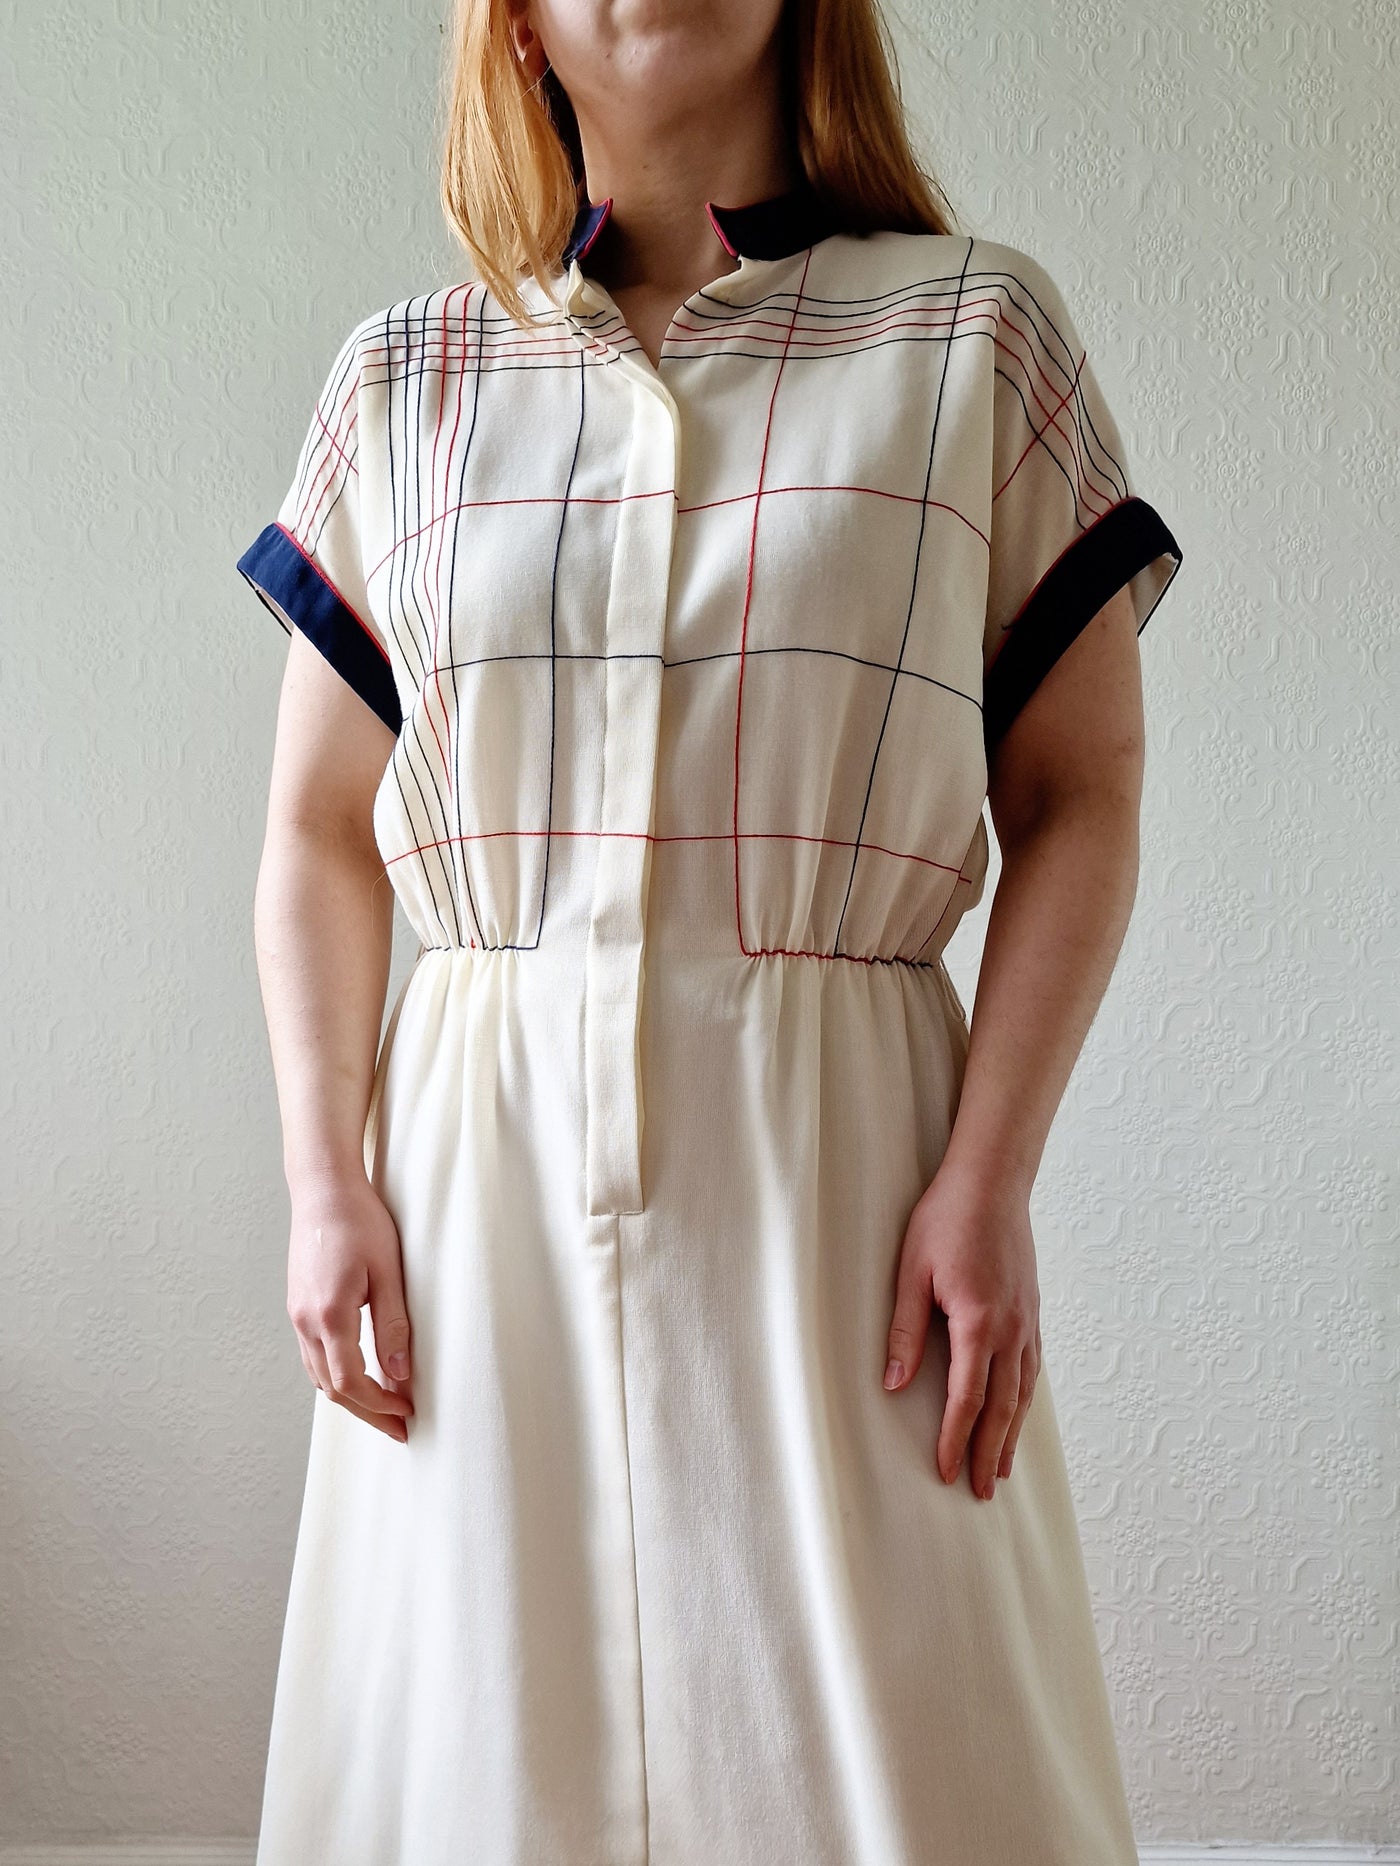 Vintage 70s Cream Shirt Dress with Short Sleeves - M